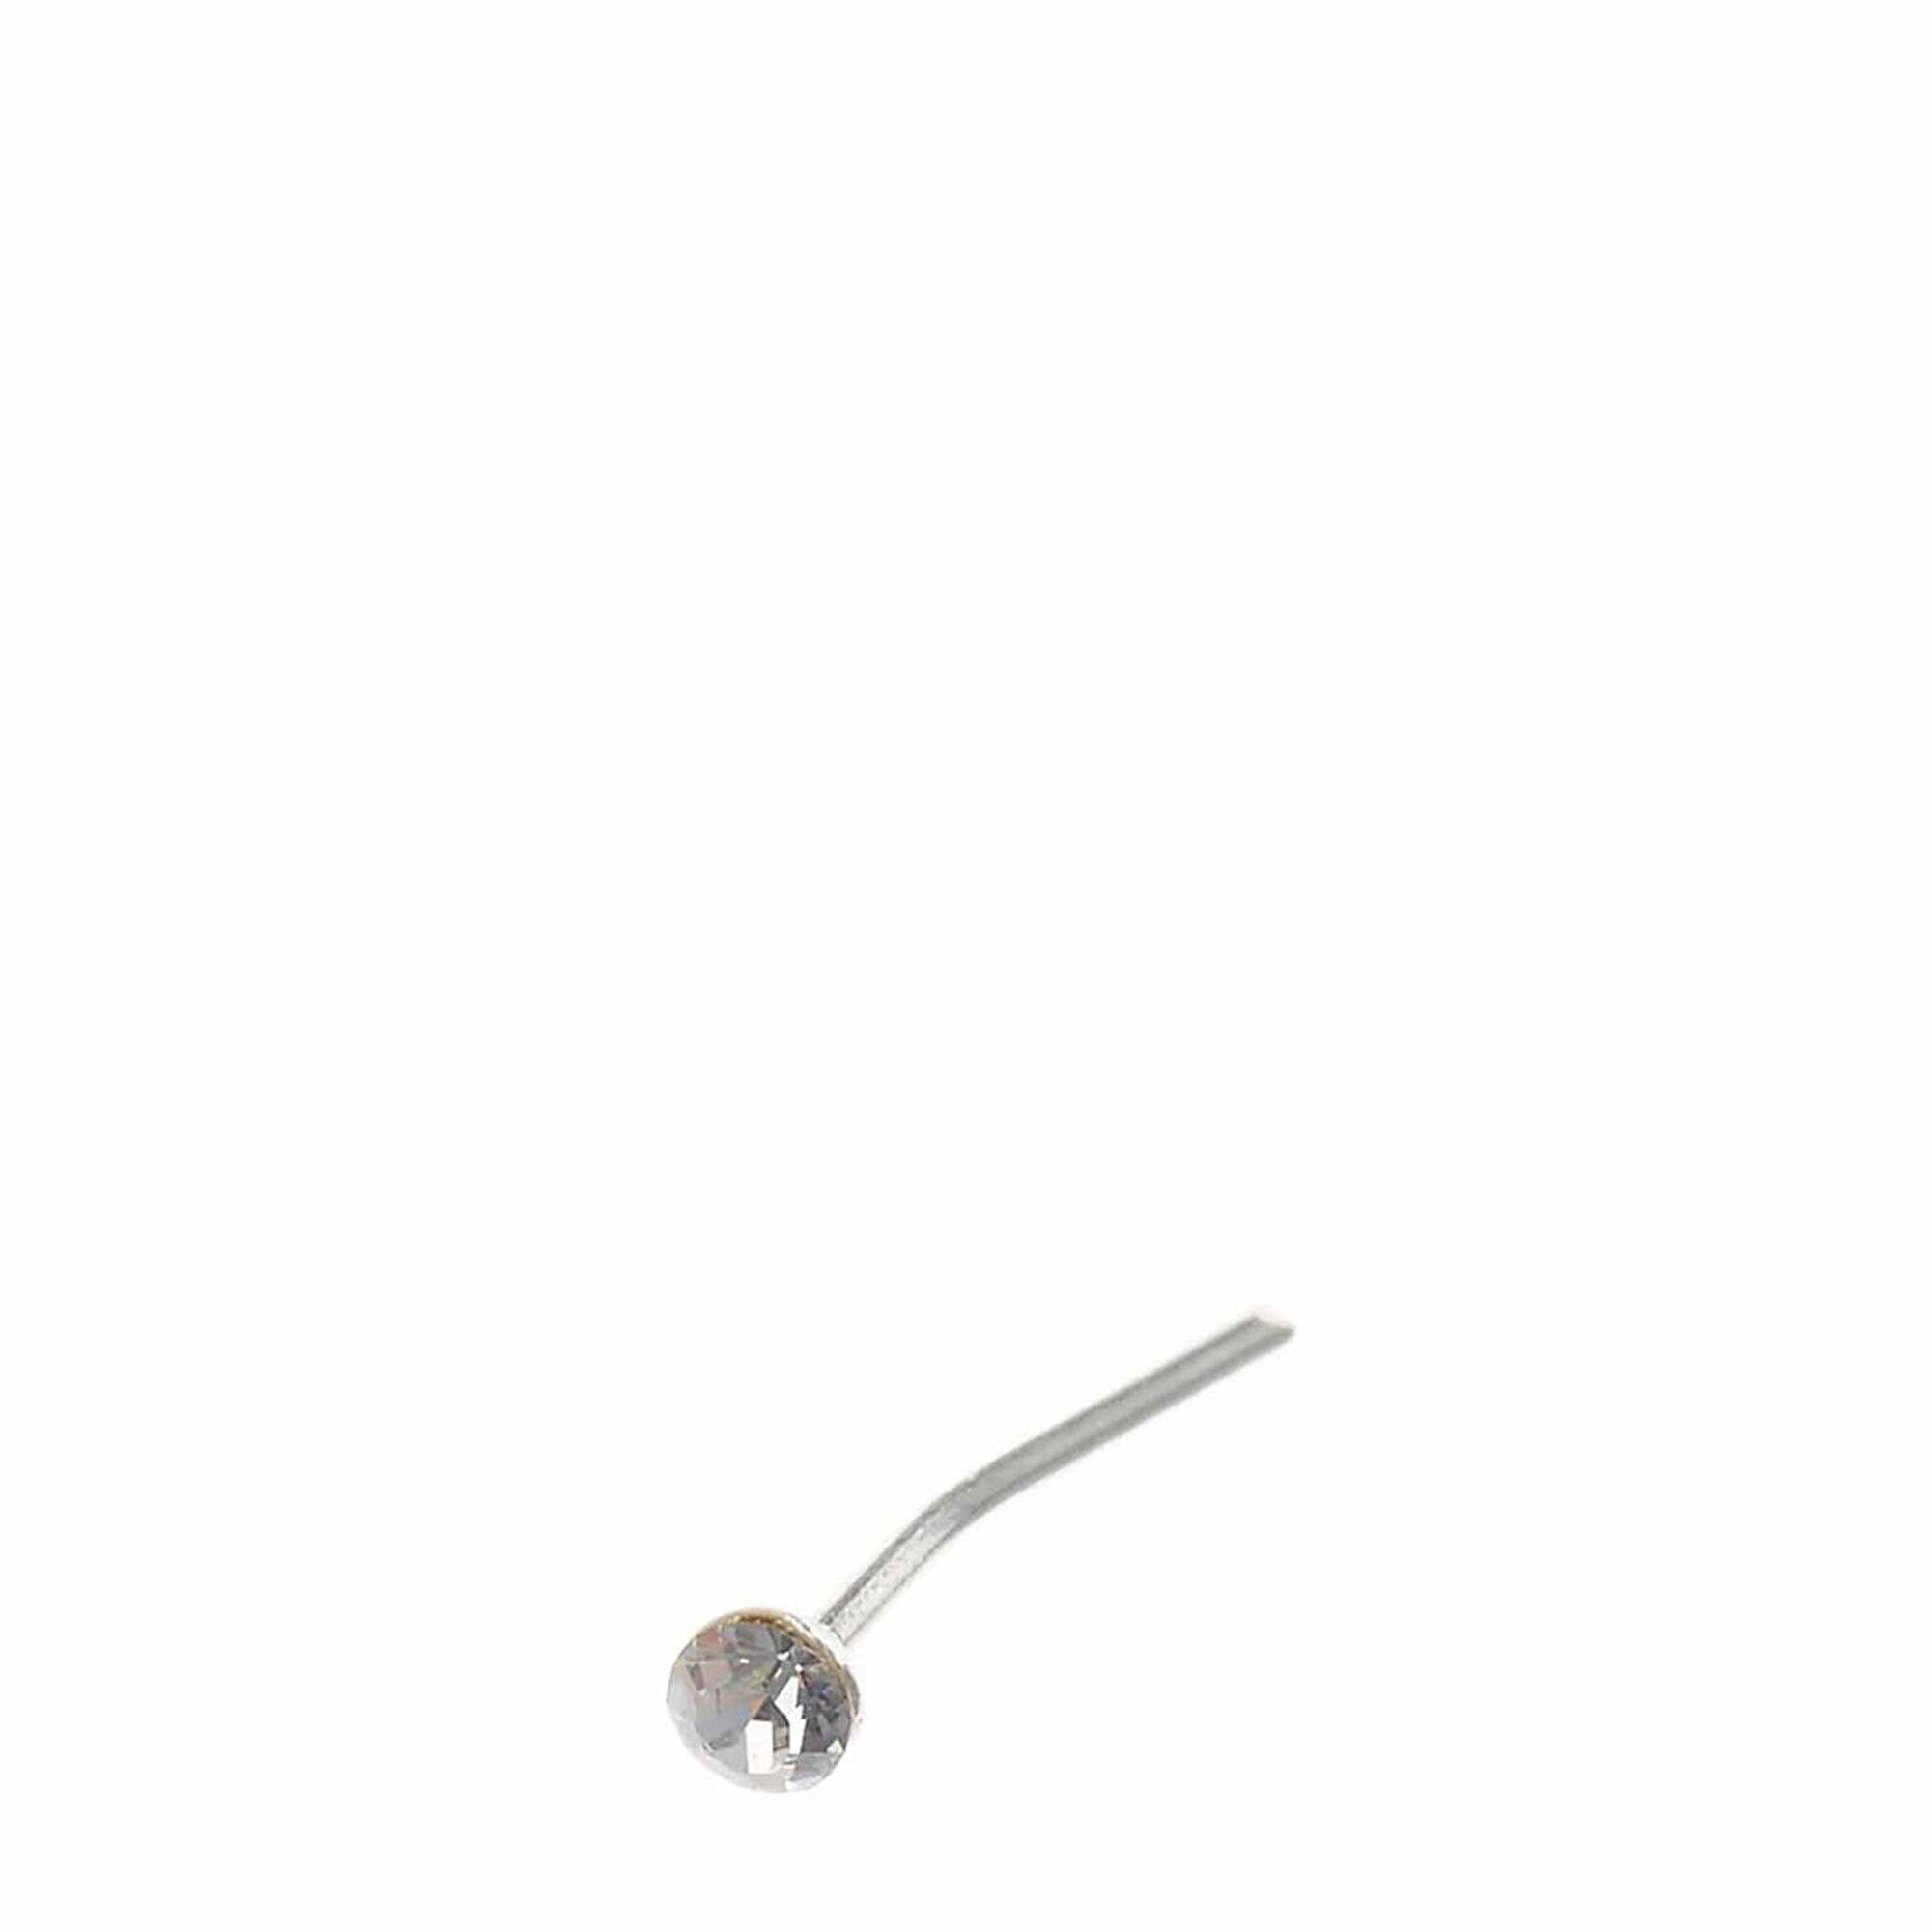 View Claires 22G Crystal Nose Stud Silver information